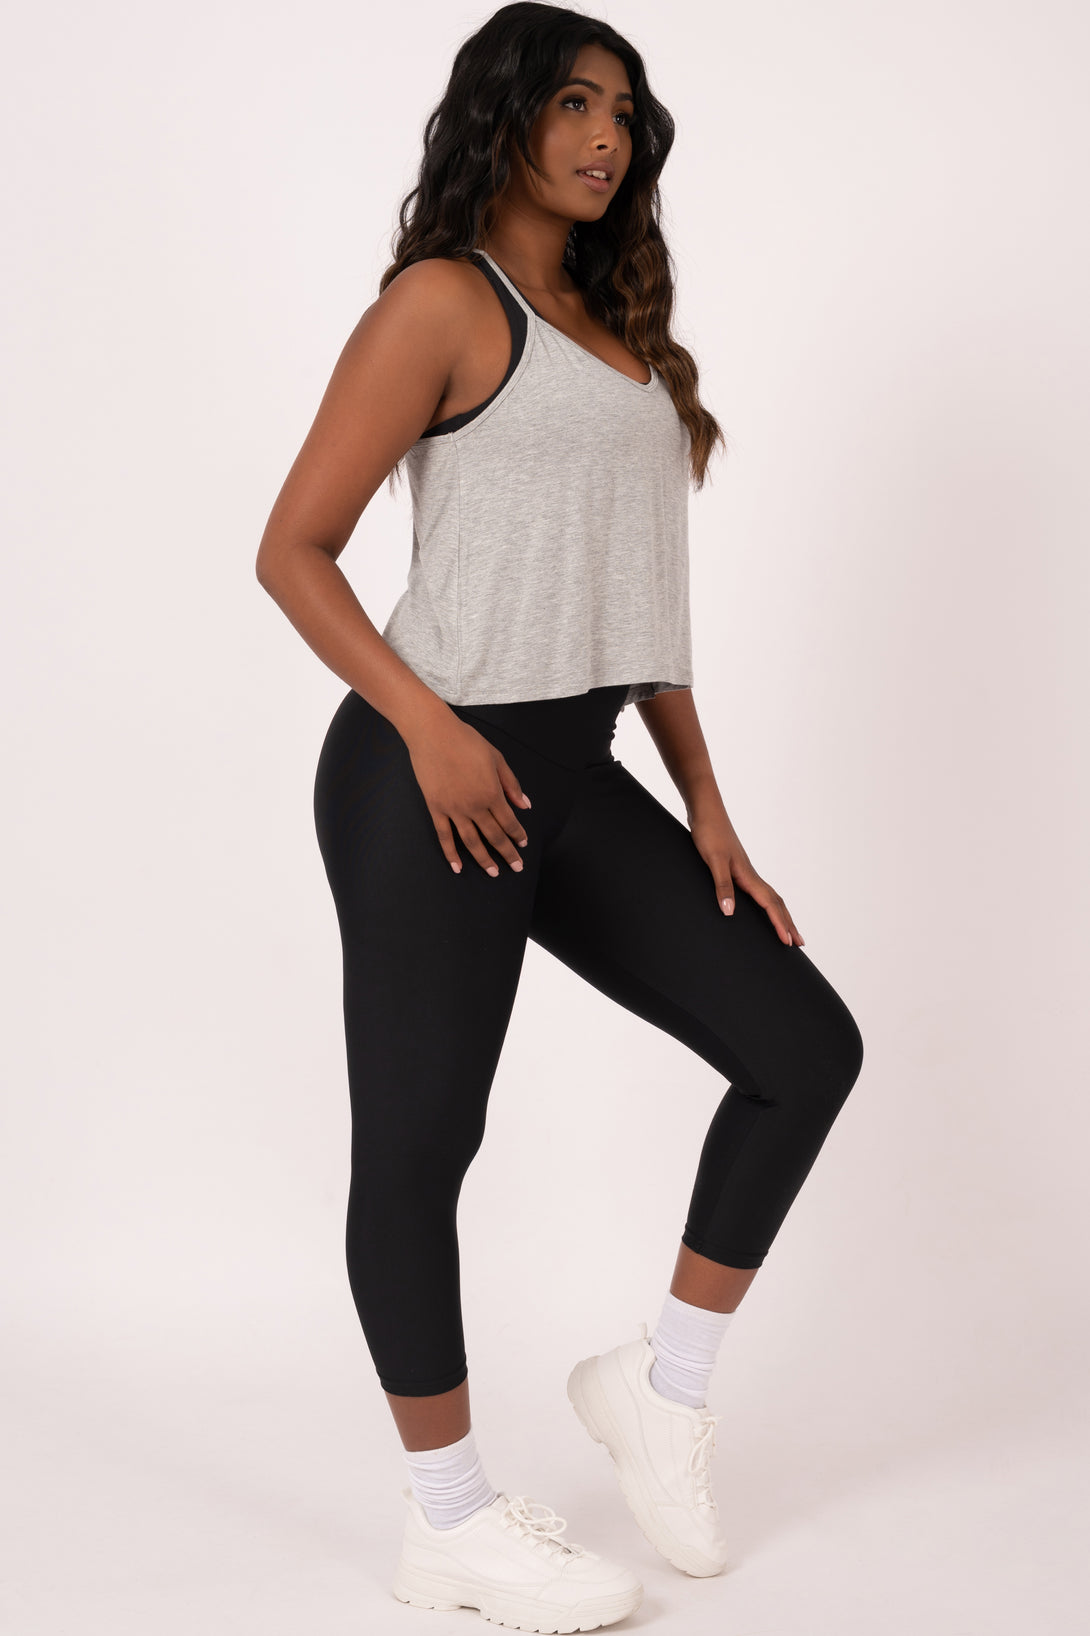 Heather Grey Slinky To Touch - Cropped Singlet - Exoticathletica